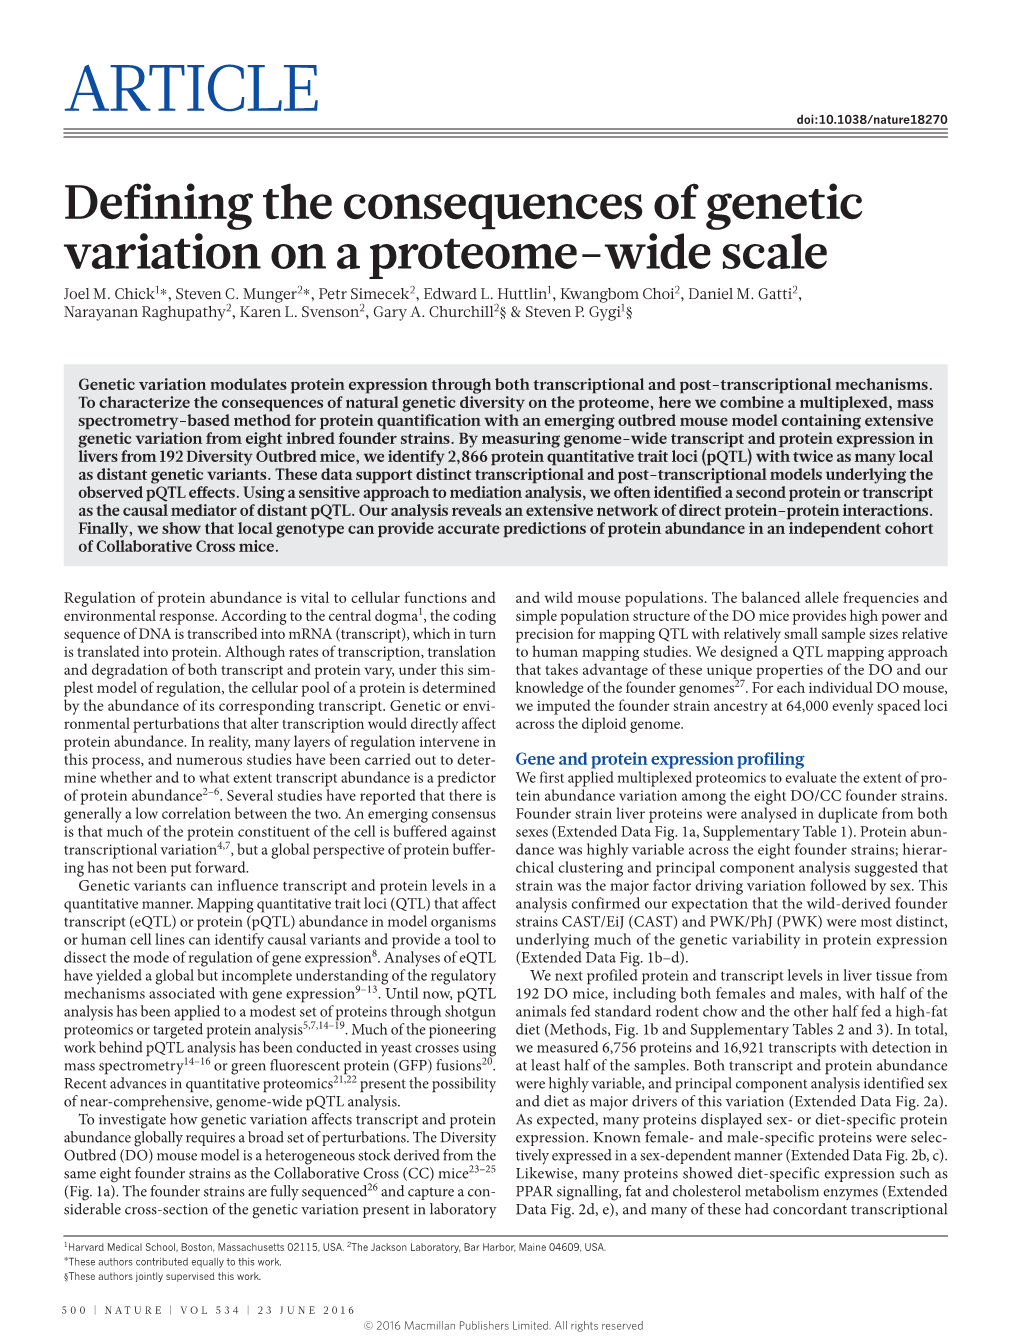 Defining the Consequences of Genetic Variation on a Proteome-Wide Scale Joel M